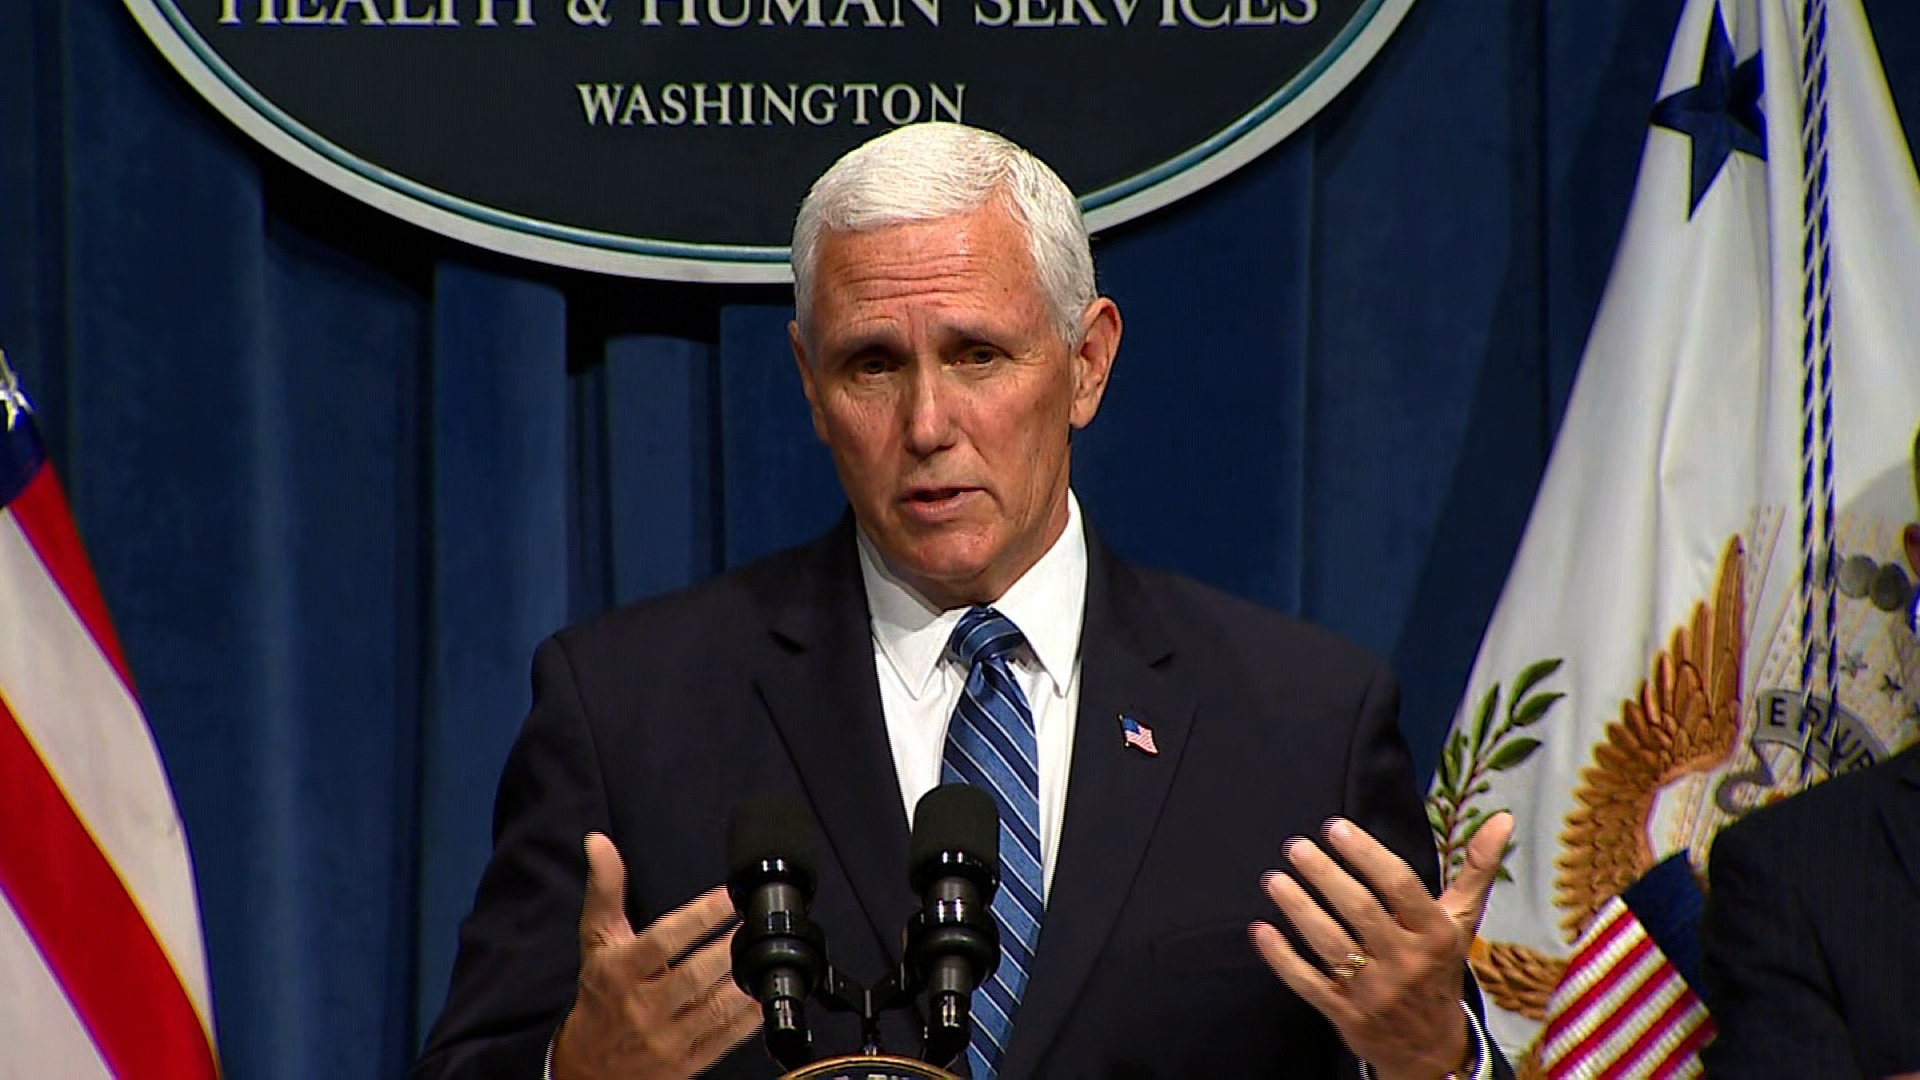 Vice President Mike Pence speaks at a coronavirus task force briefing in Washington, DC, on June 26.